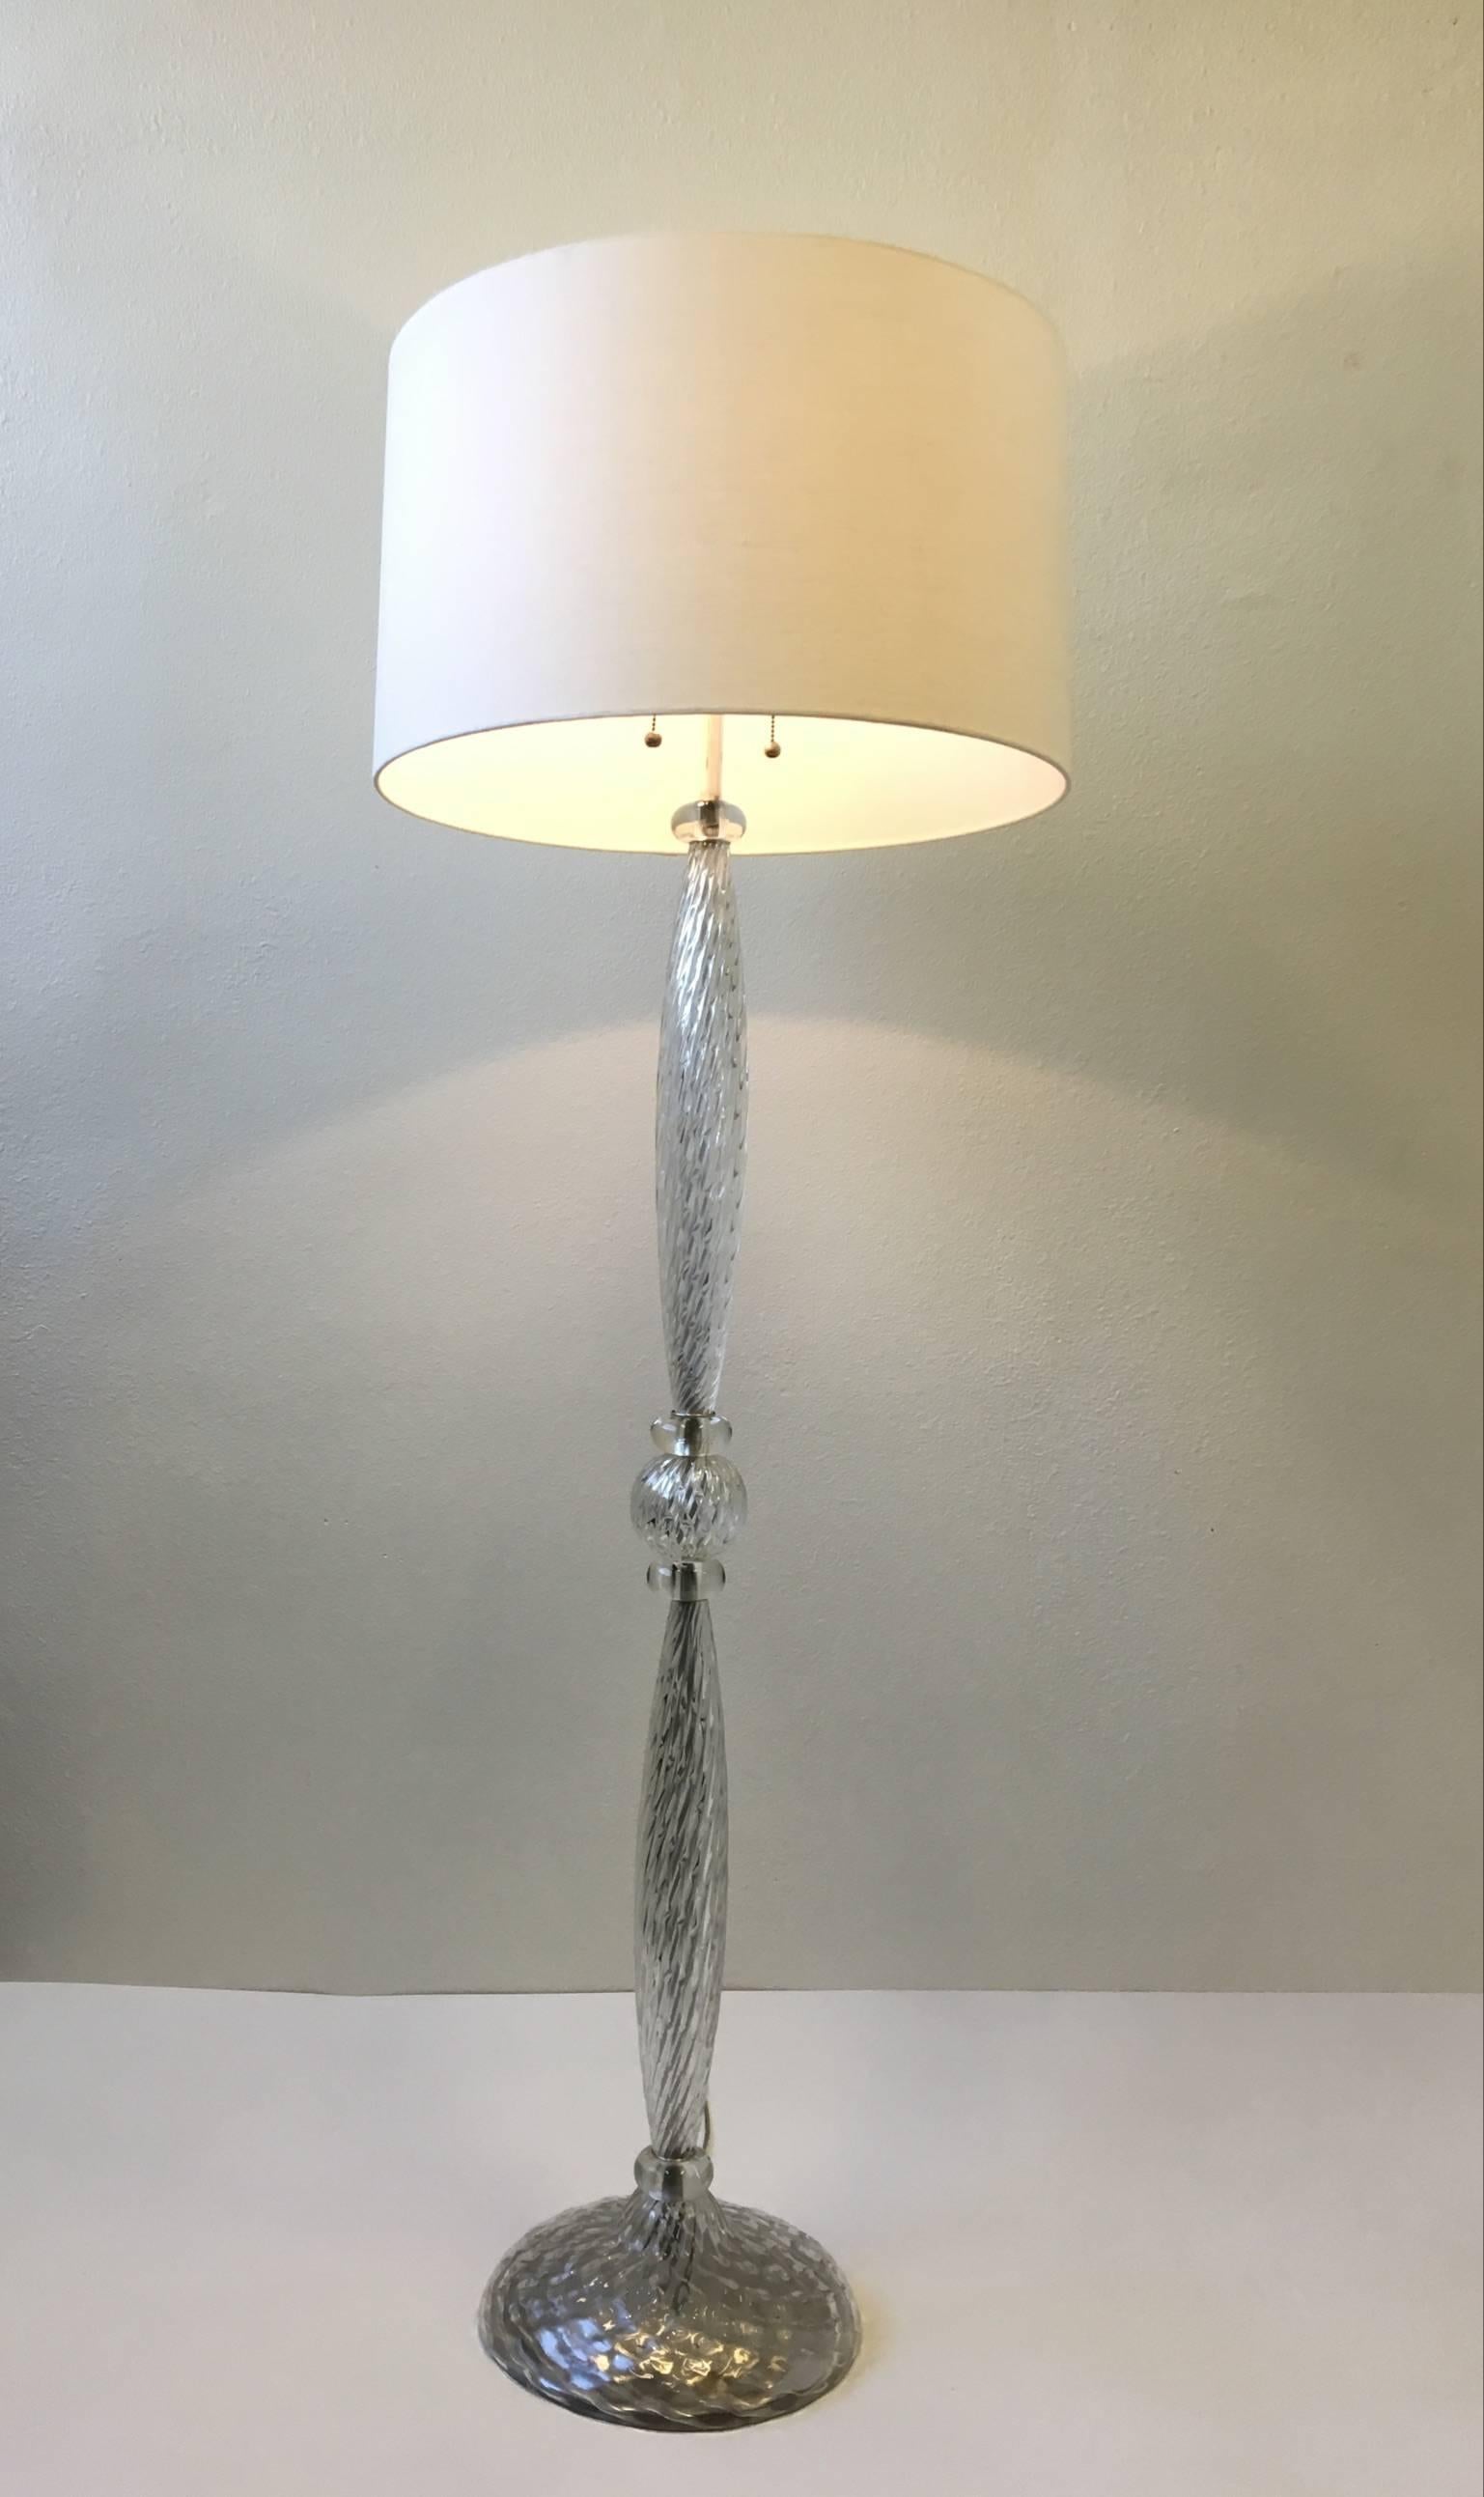 A glamorous 1960s Murano glass floor lamp by Marbro Lamp Co.
Newly rewired and new vanilla linen shade. 

Dimensions: 68.5